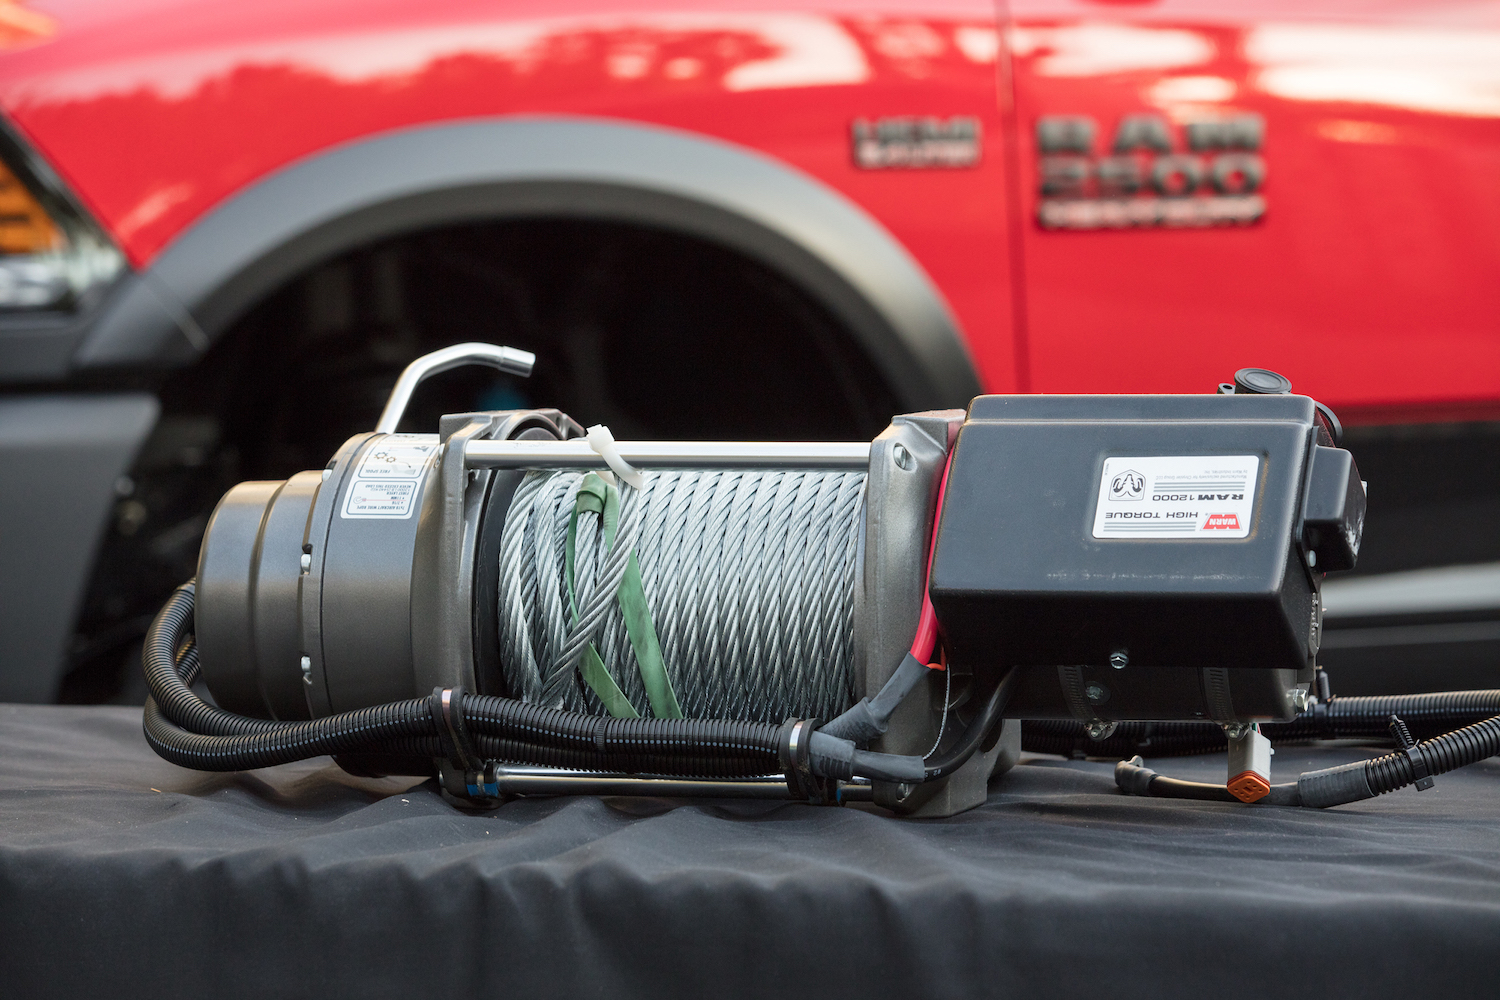 Promotional photo of a Warn winch in front of the Ram 2500 power wagon pickup truck you can order it on.